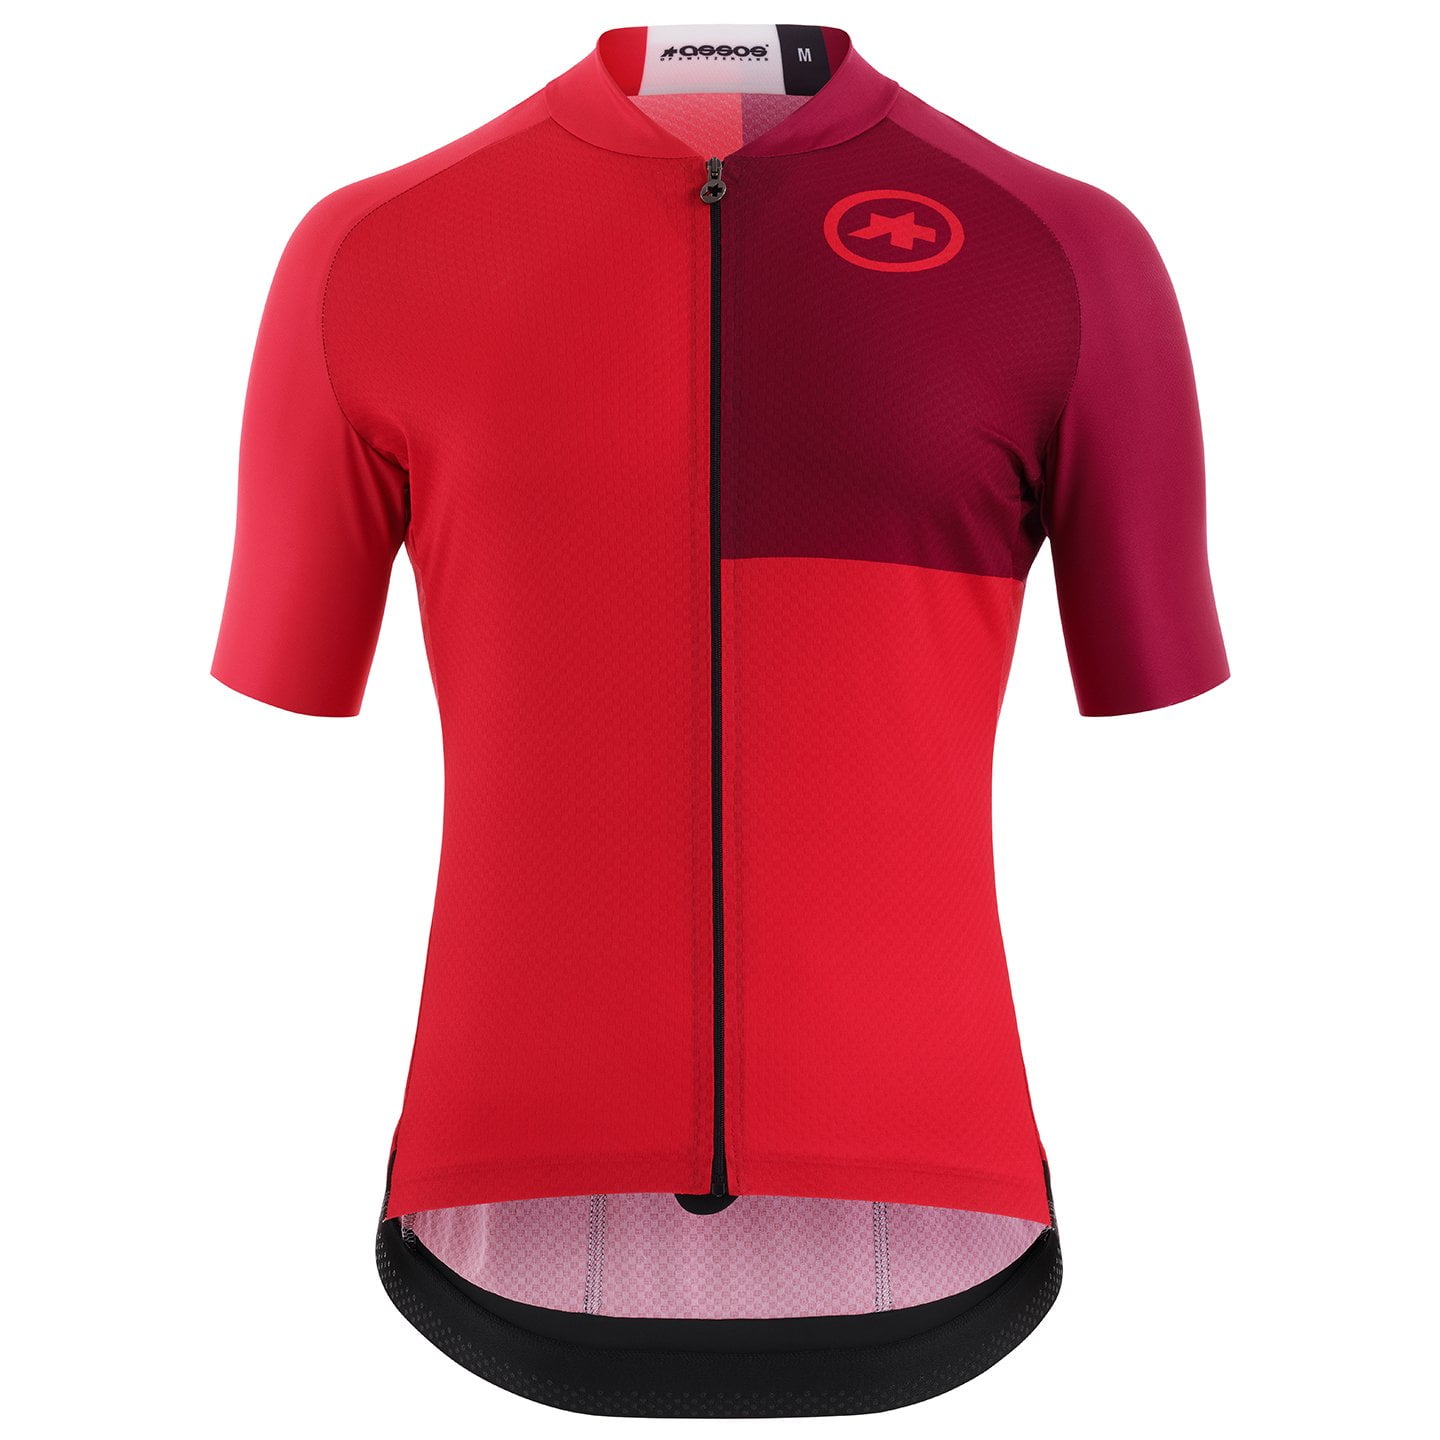 ASSOS Mille GT C2 EVO Stahlstern Short Sleeve Jersey Short Sleeve Jersey, for men, size L, Cycling jersey, Cycling clothing